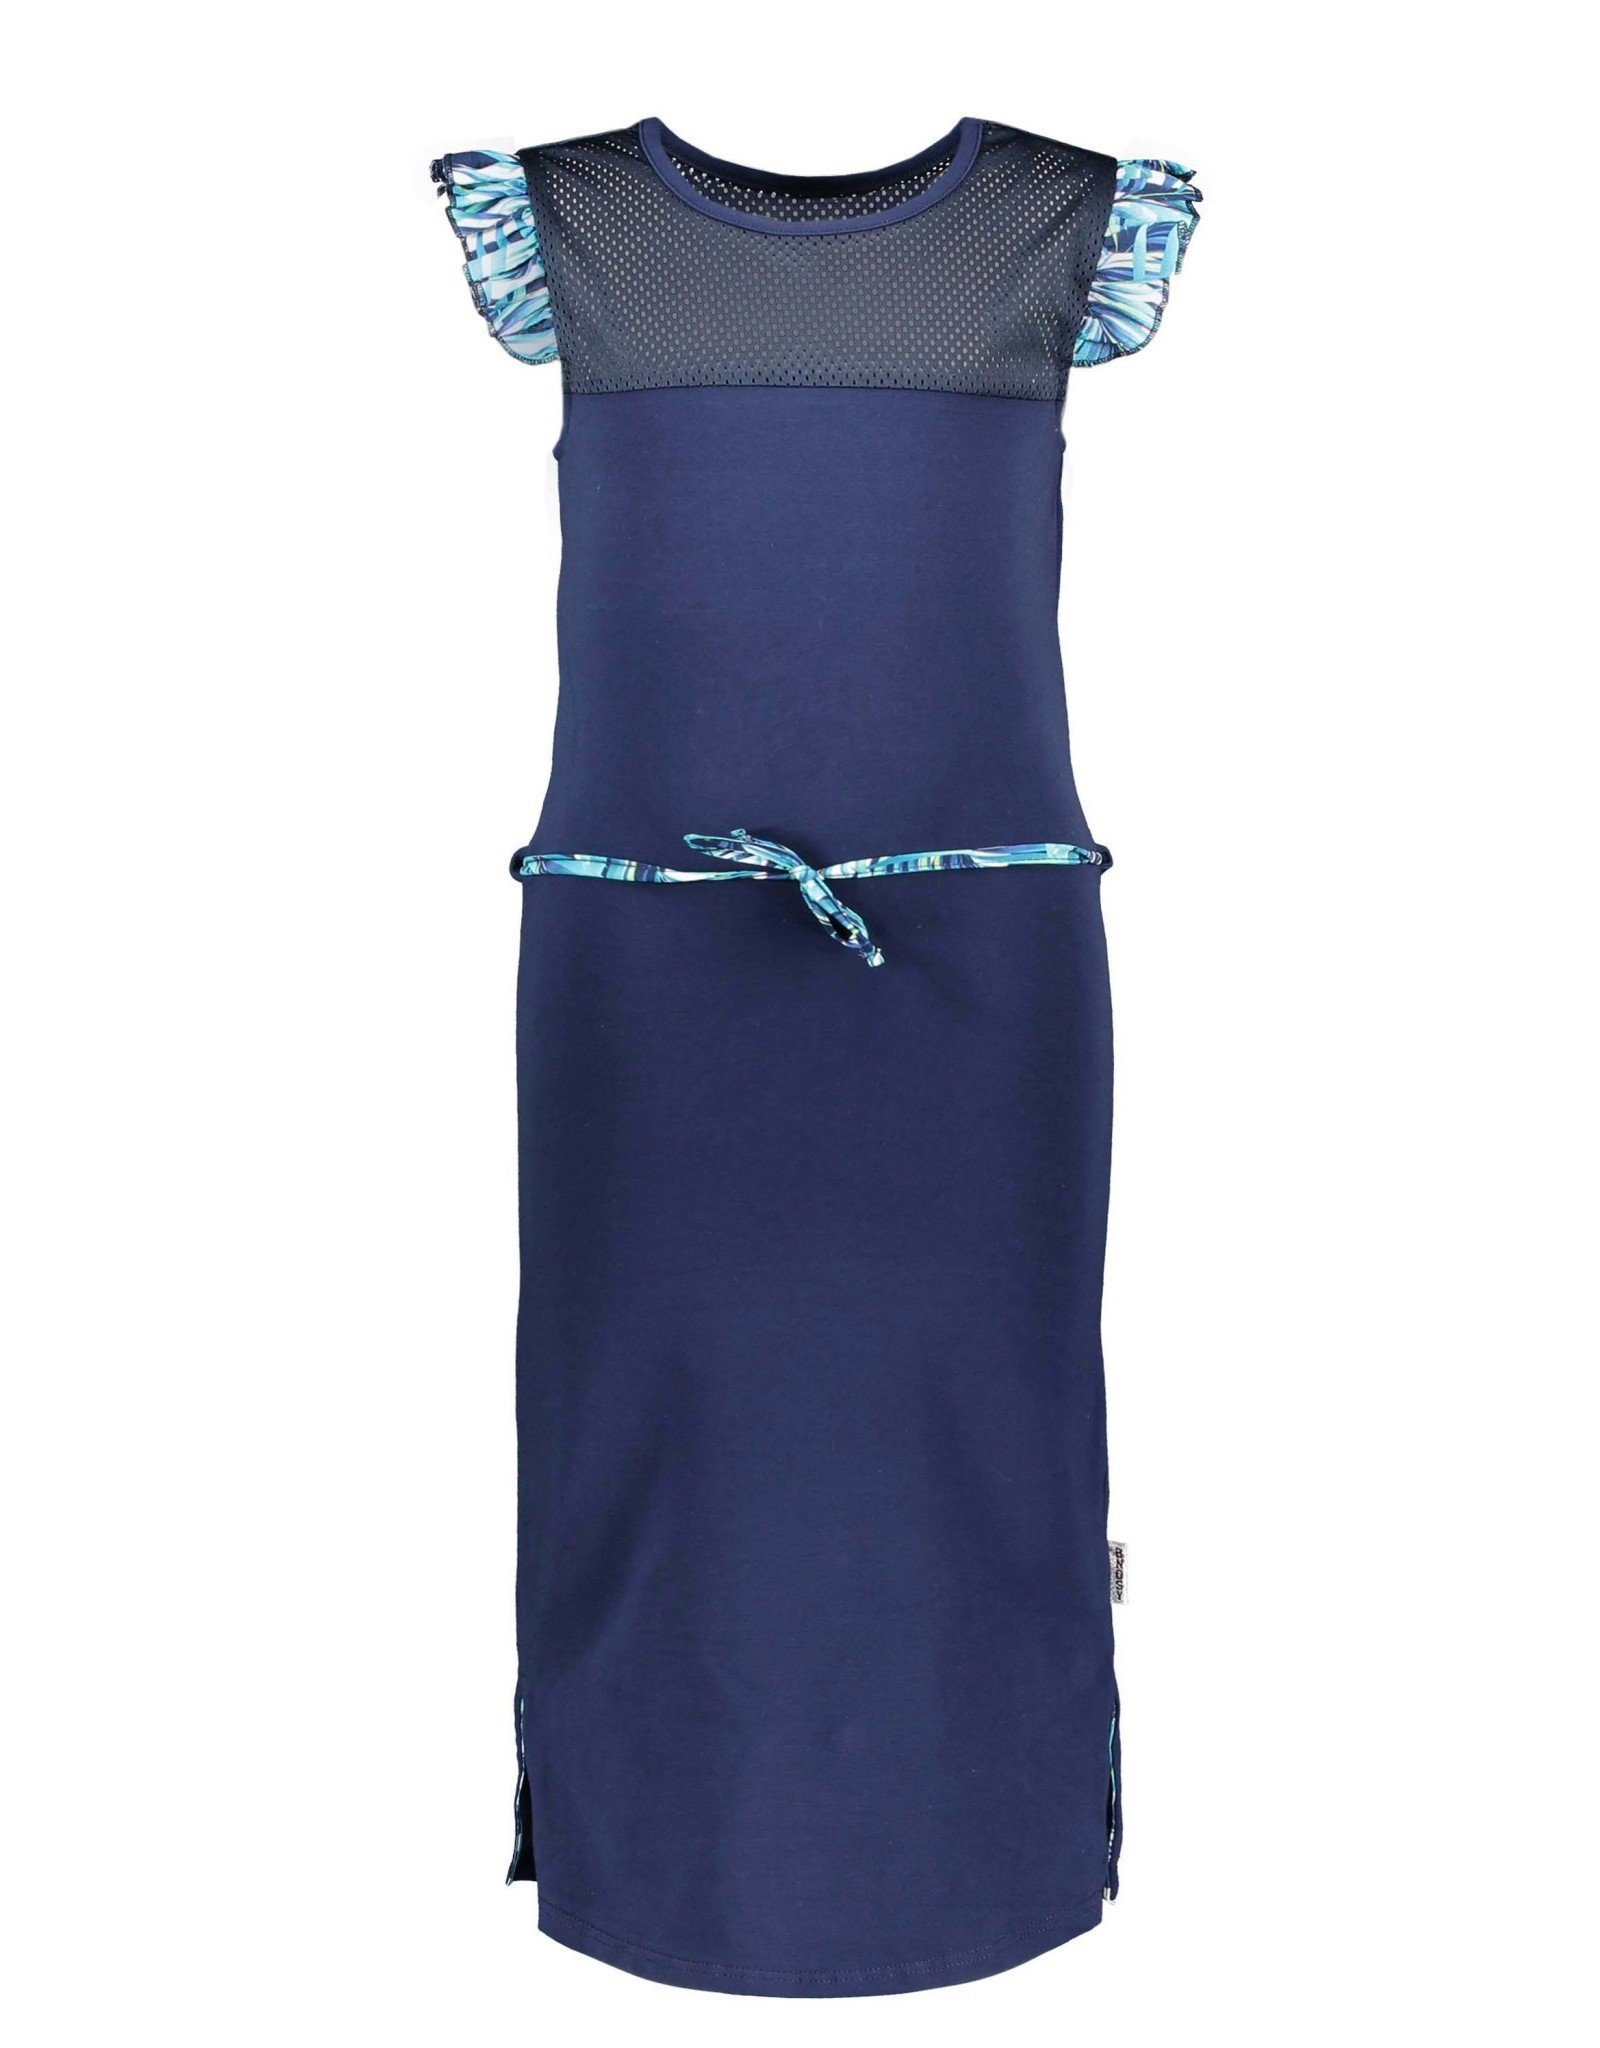 B-nosy Girls sweat dress with sporty mesh c&s and belt 146 space blue